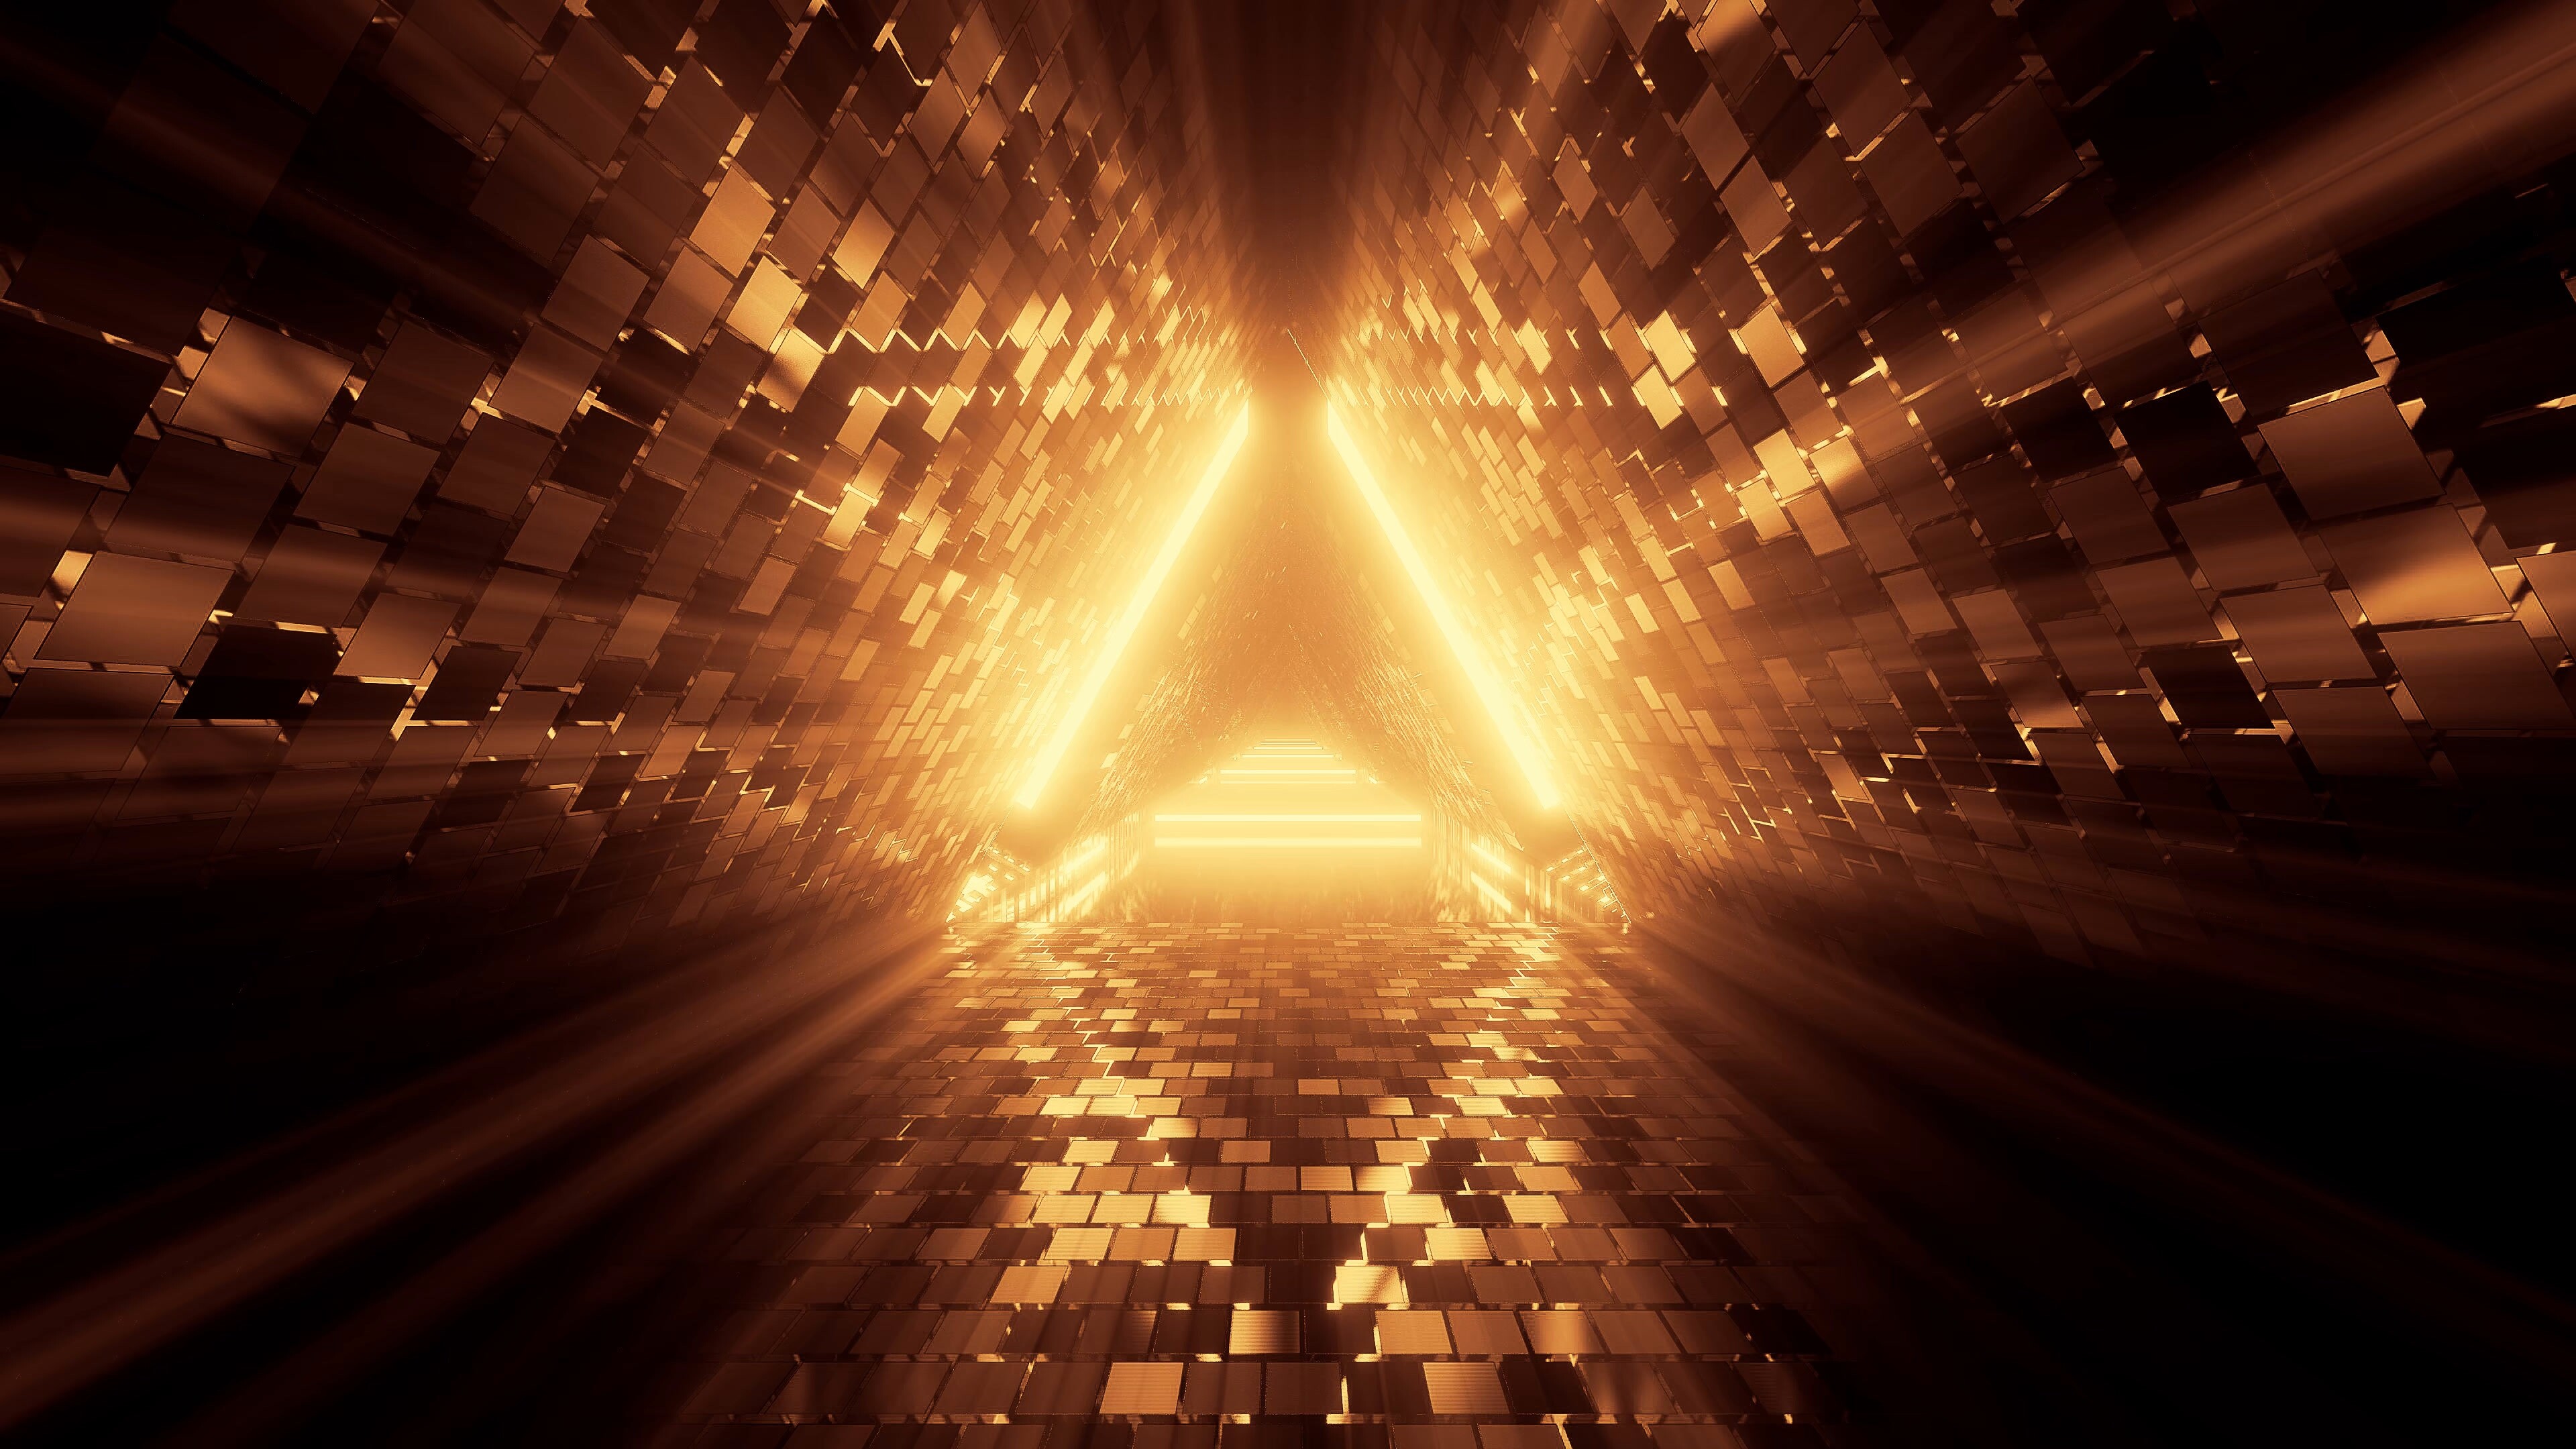 Gold Lights: Glowing light at the end of triangle tunnel, Decorative golden tiles, Abstract. 3840x2160 4K Wallpaper.